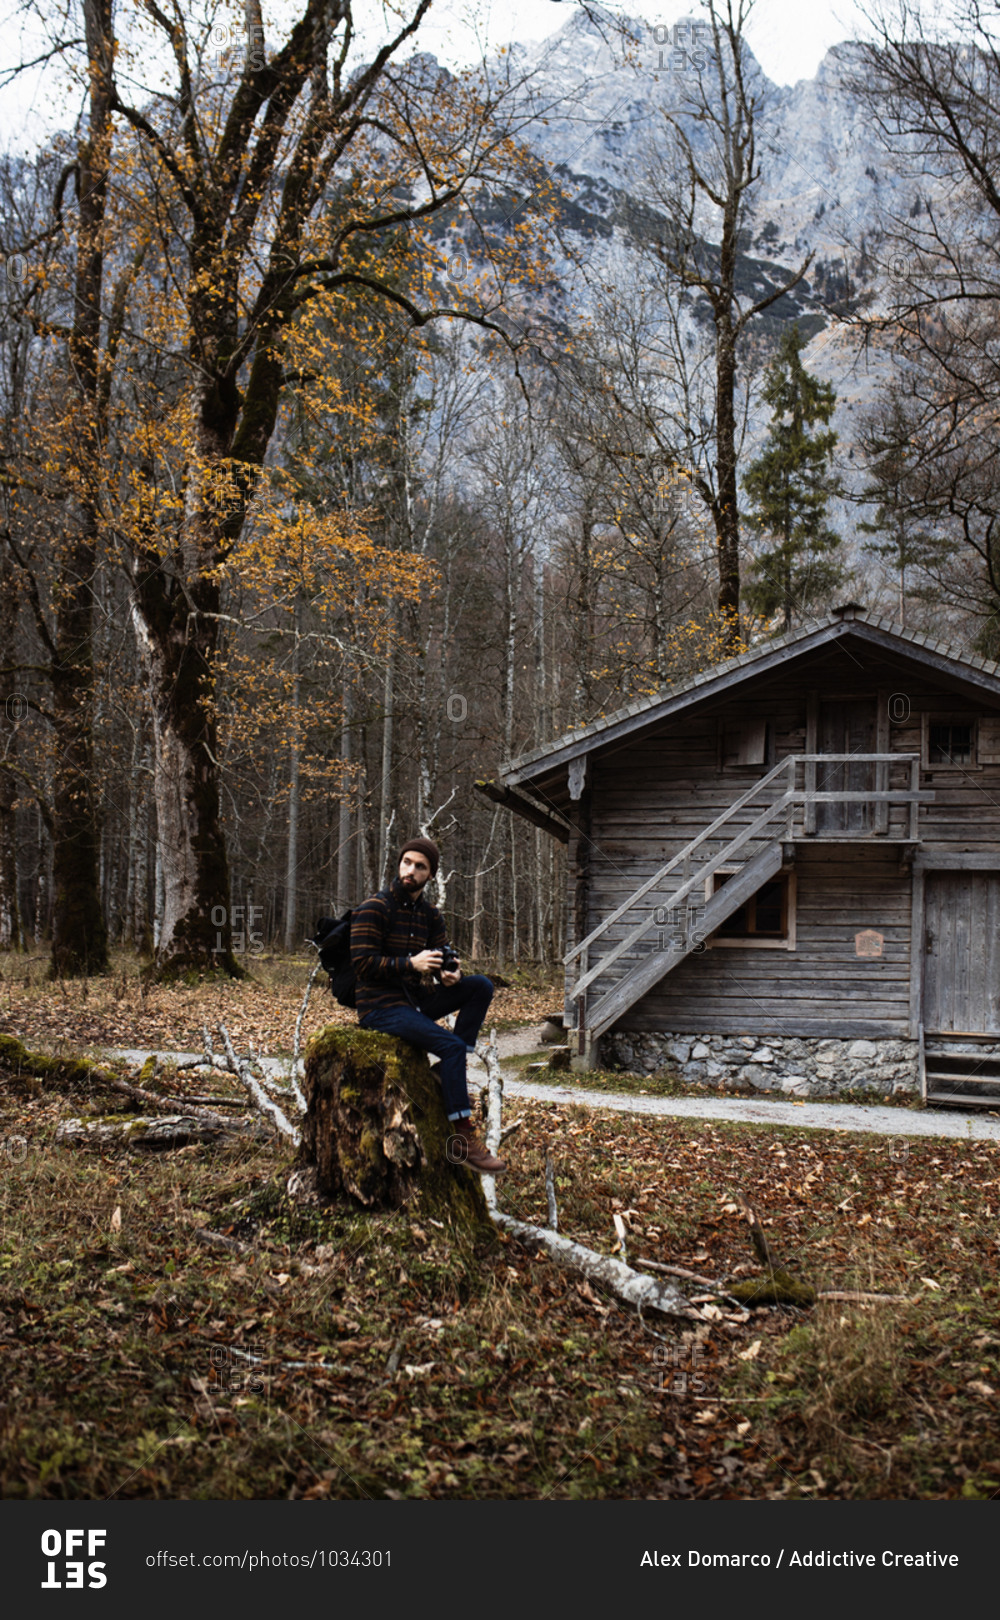 Side view of man in warm outerwear with backpack sitting on stone near old wooden hut located in leafless forest surrounded by mountains in overcast autumn day